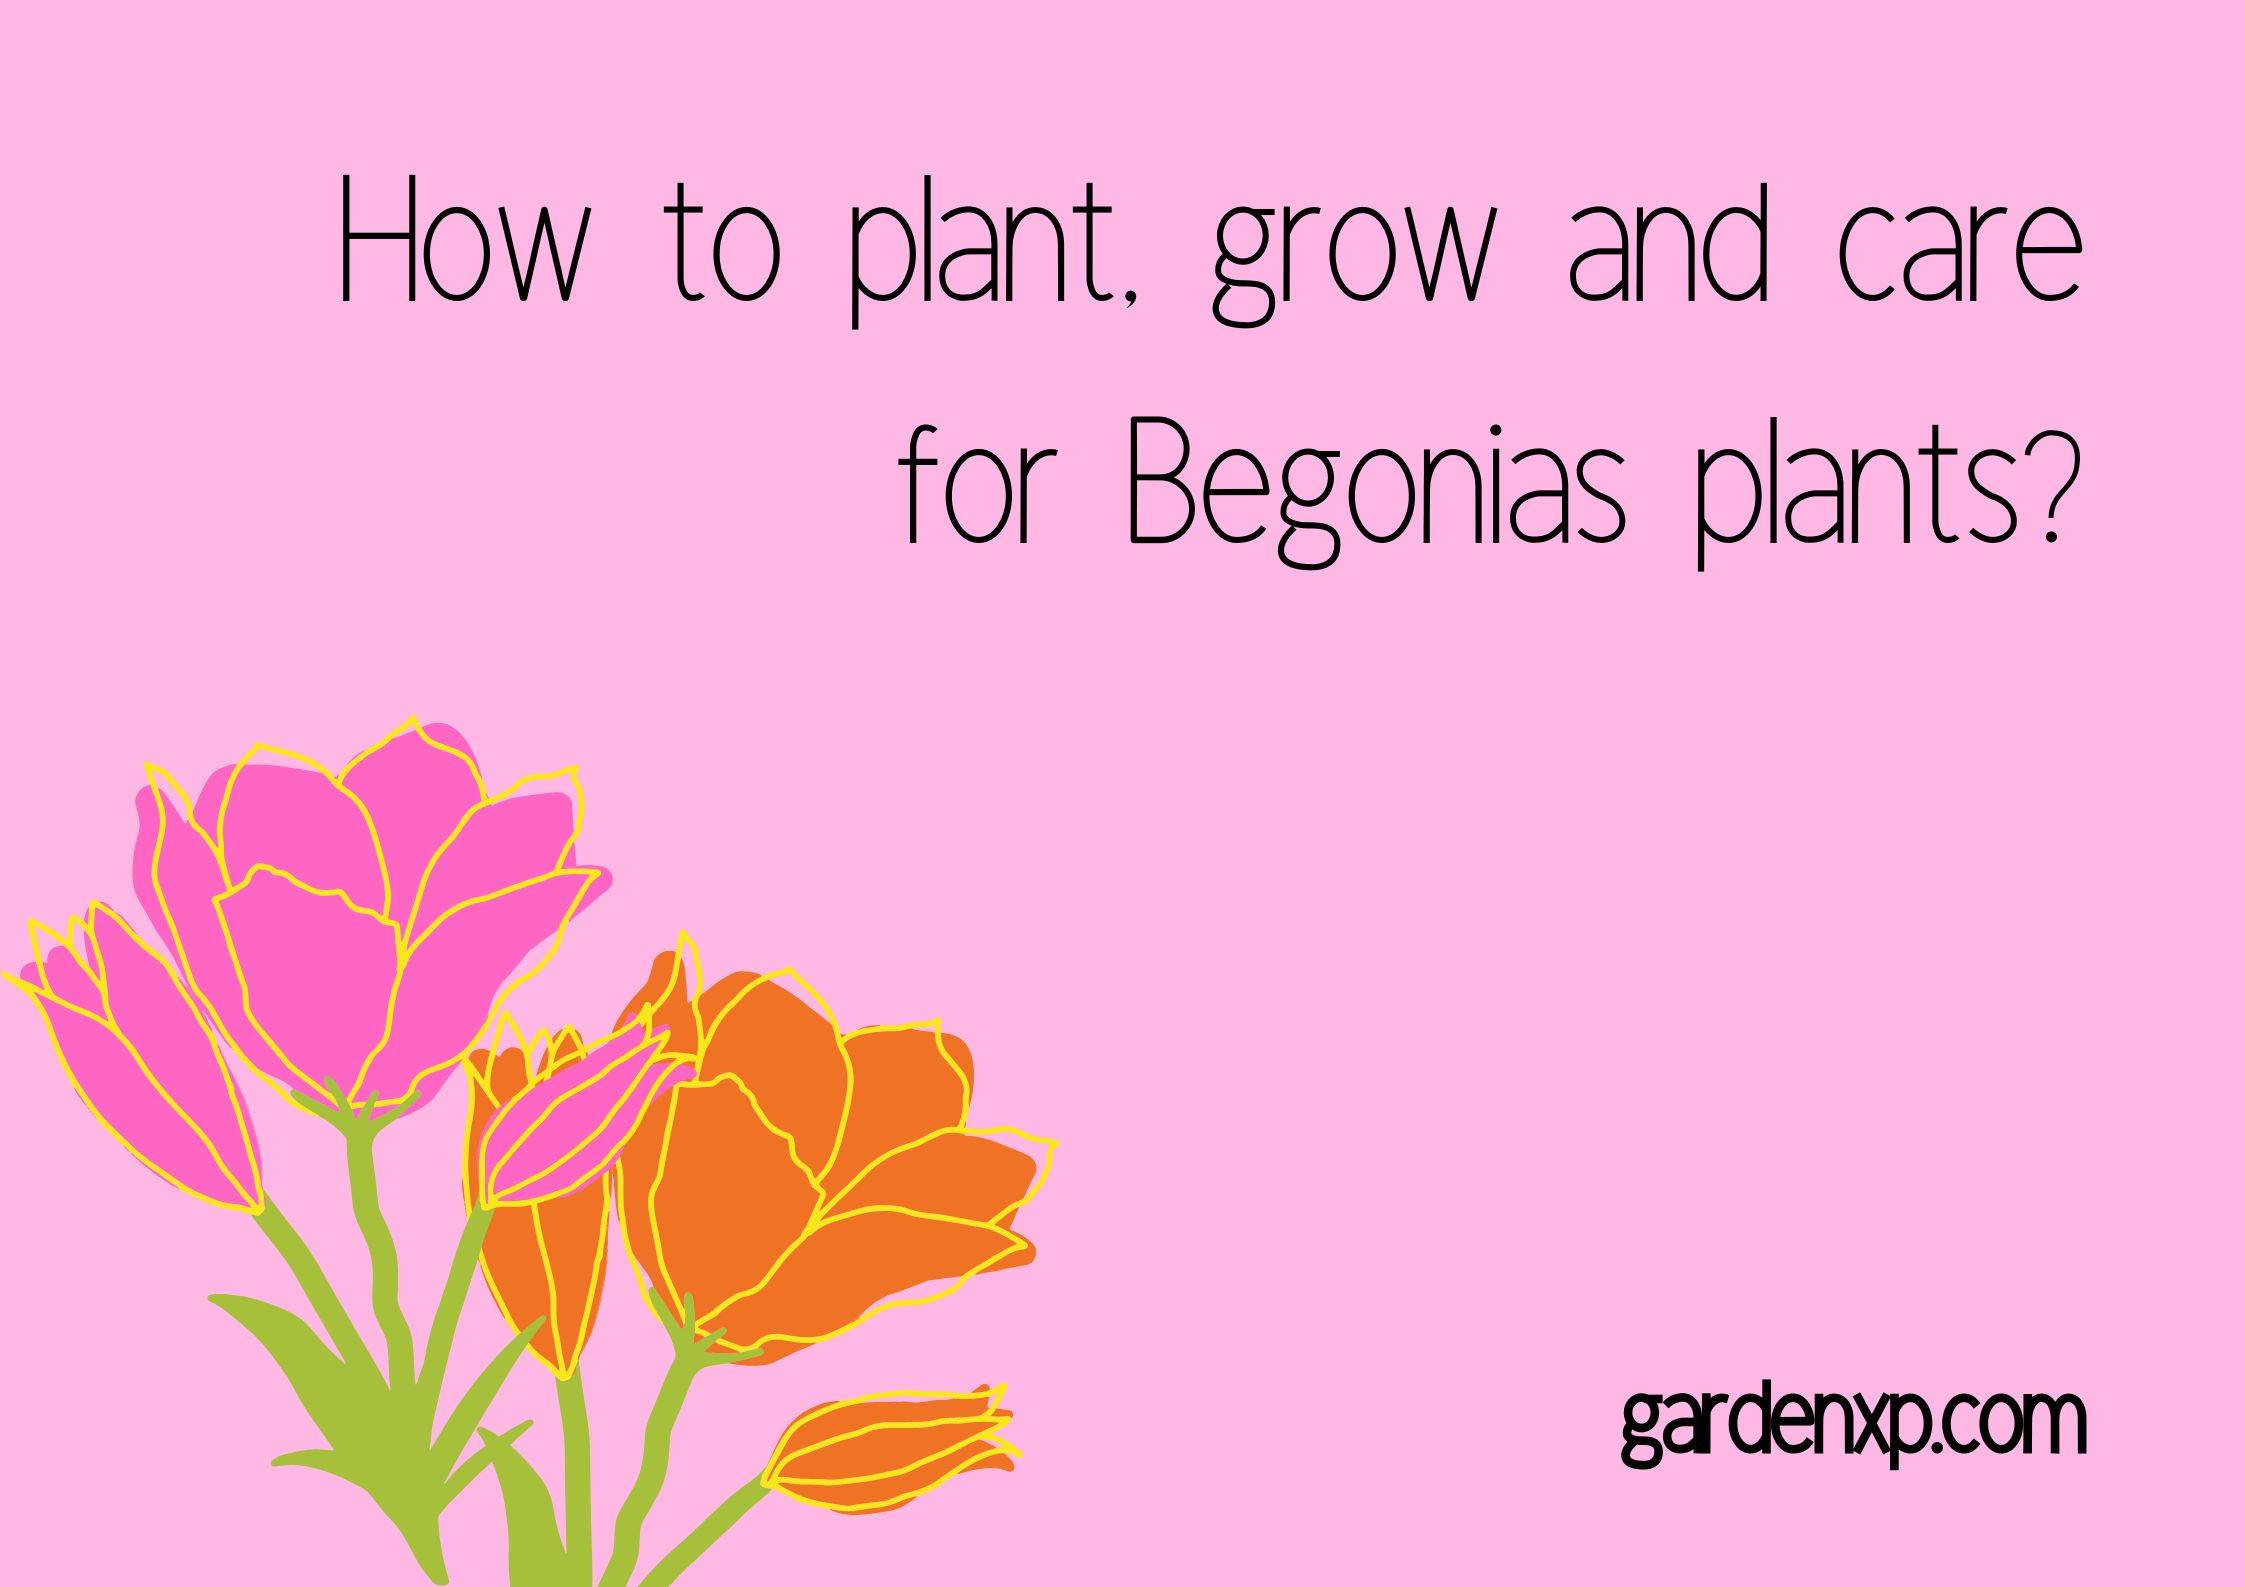 How to plant grow and care for Begonias plants?